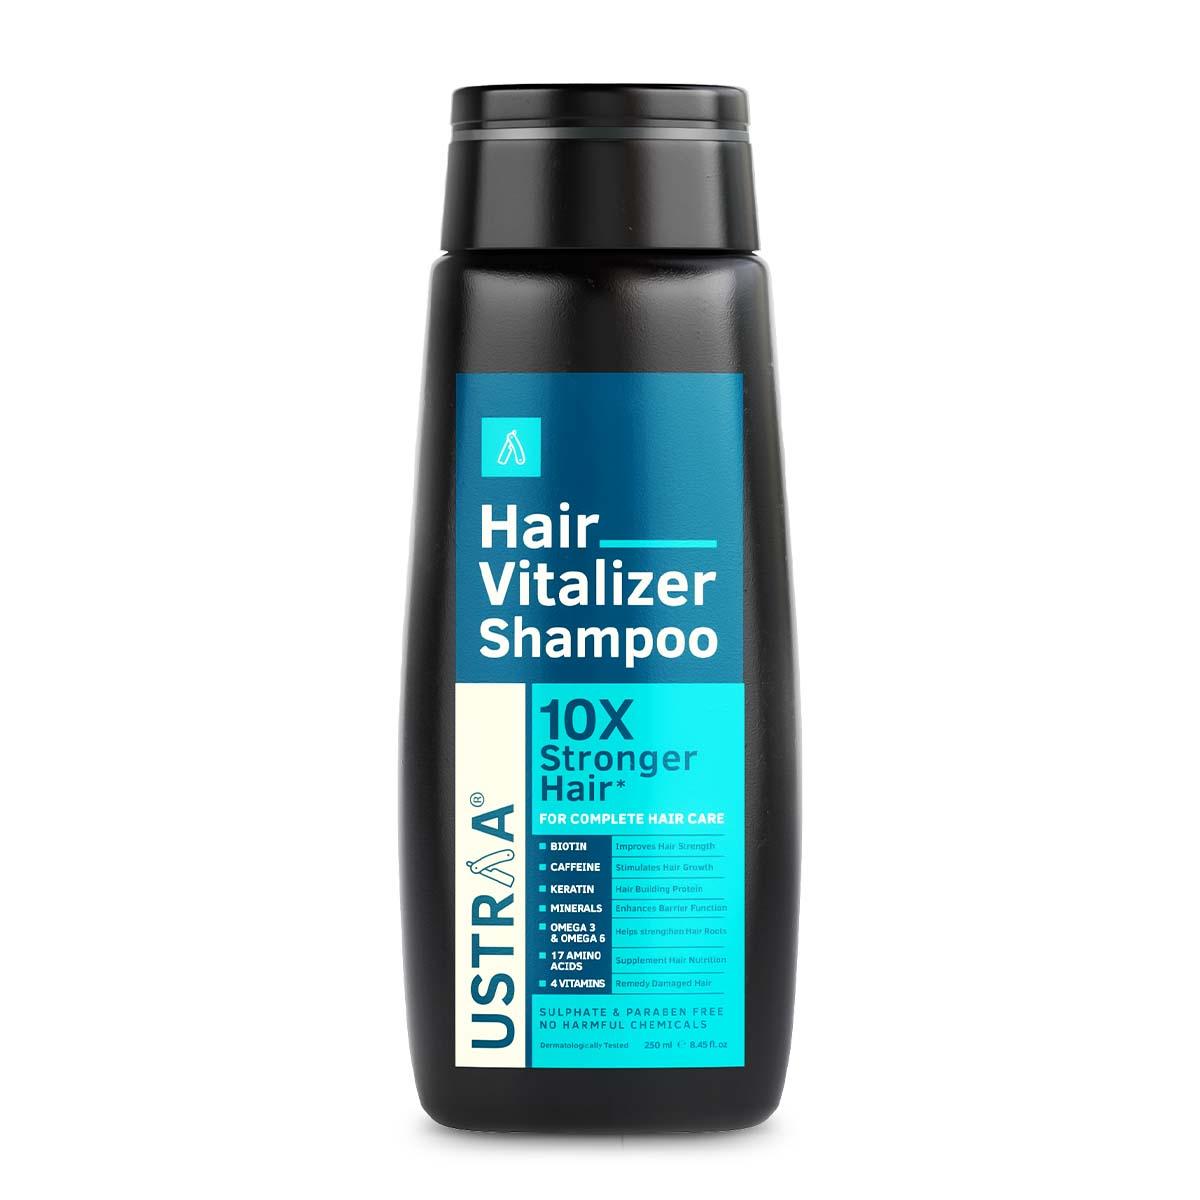 Ustraa Hair Vitalizer Shampoo keep 10X Stronger Hair - refers to hair breakage as tested by an independent lab v/s a non-conditioning shampoo